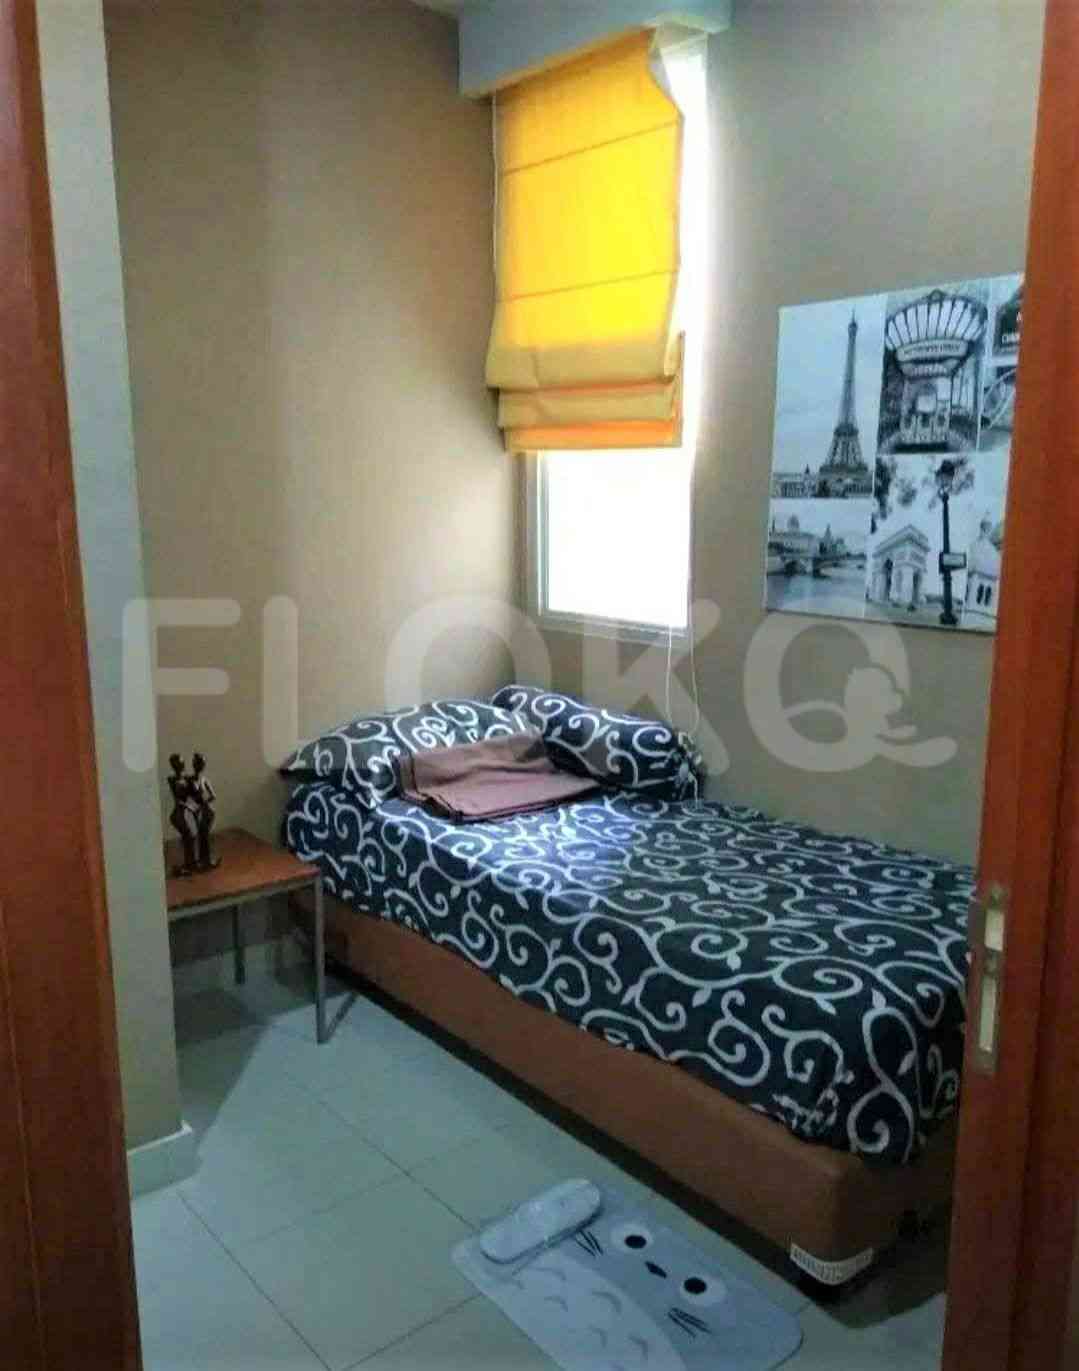 2 Bedroom on 15th Floor for Rent in Kuningan Place Apartment - fku817 4